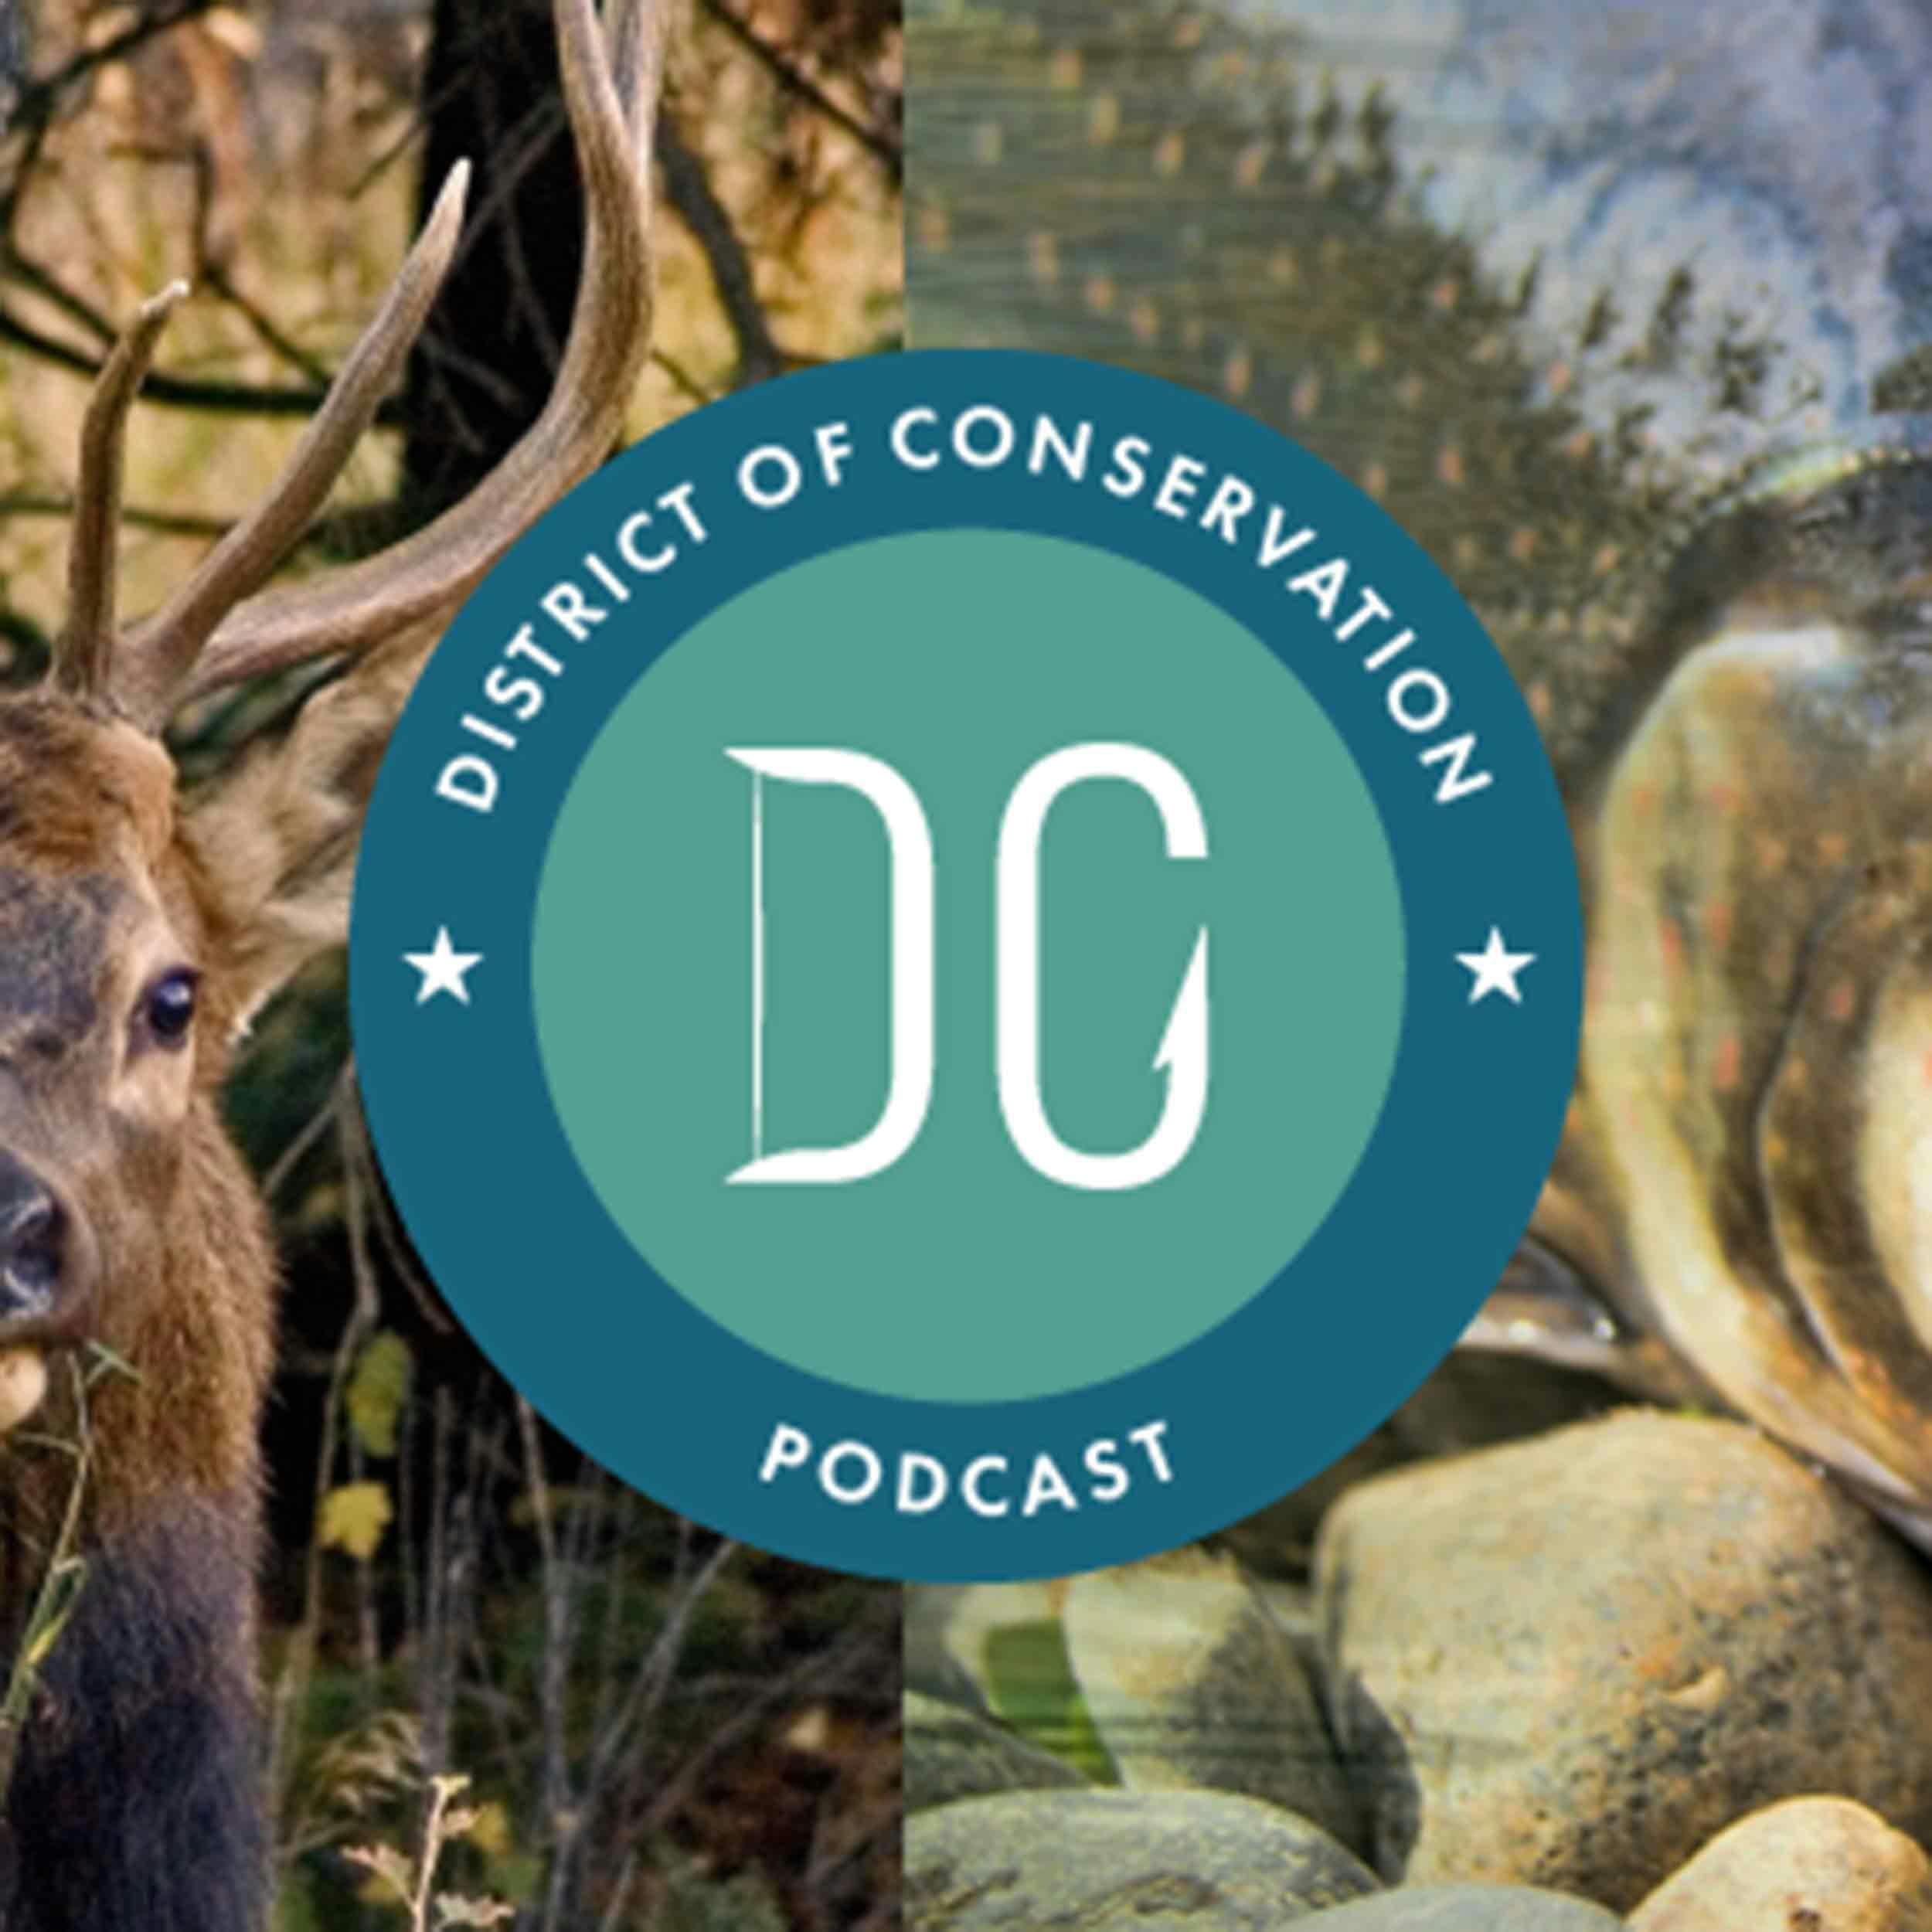 BONUS - Samuel Ayres: Guest Appearance on The District of Conservation Podcast with Gabriella Hoffman